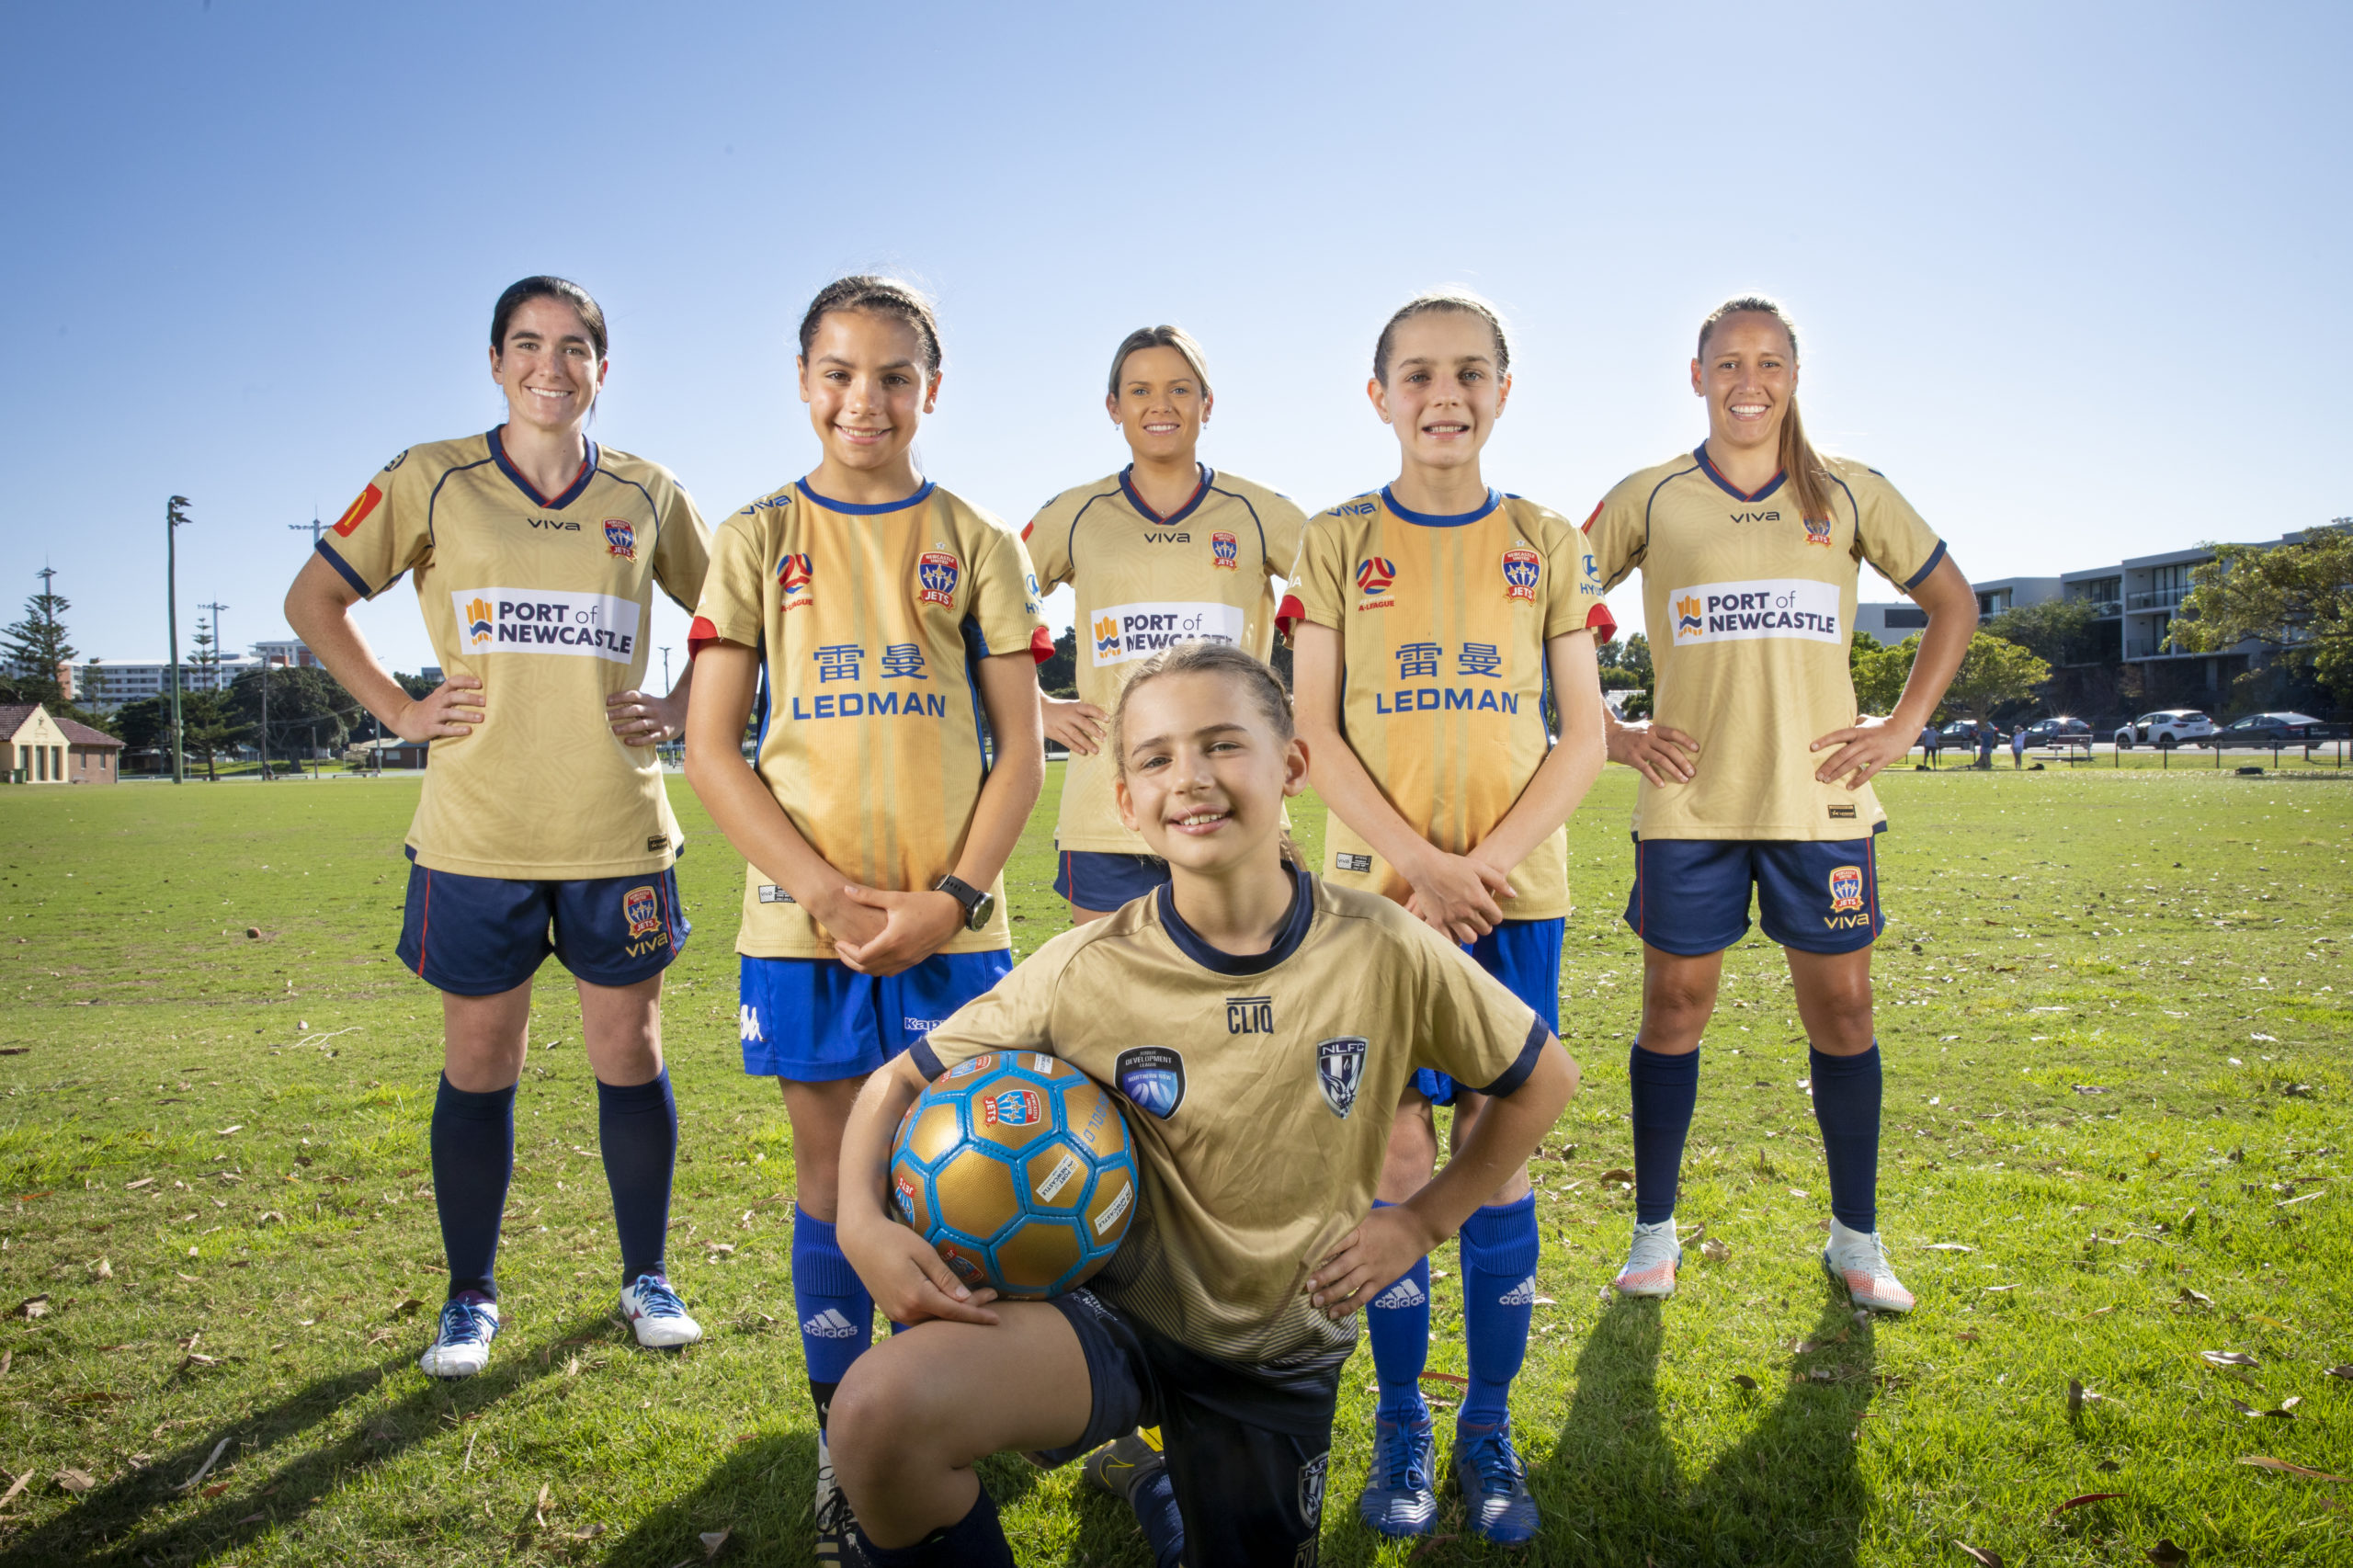 A golden era: Port Newcastle joins Newcastle Jets Women's in inspiring next generation of females in Football – Port of Newcastle